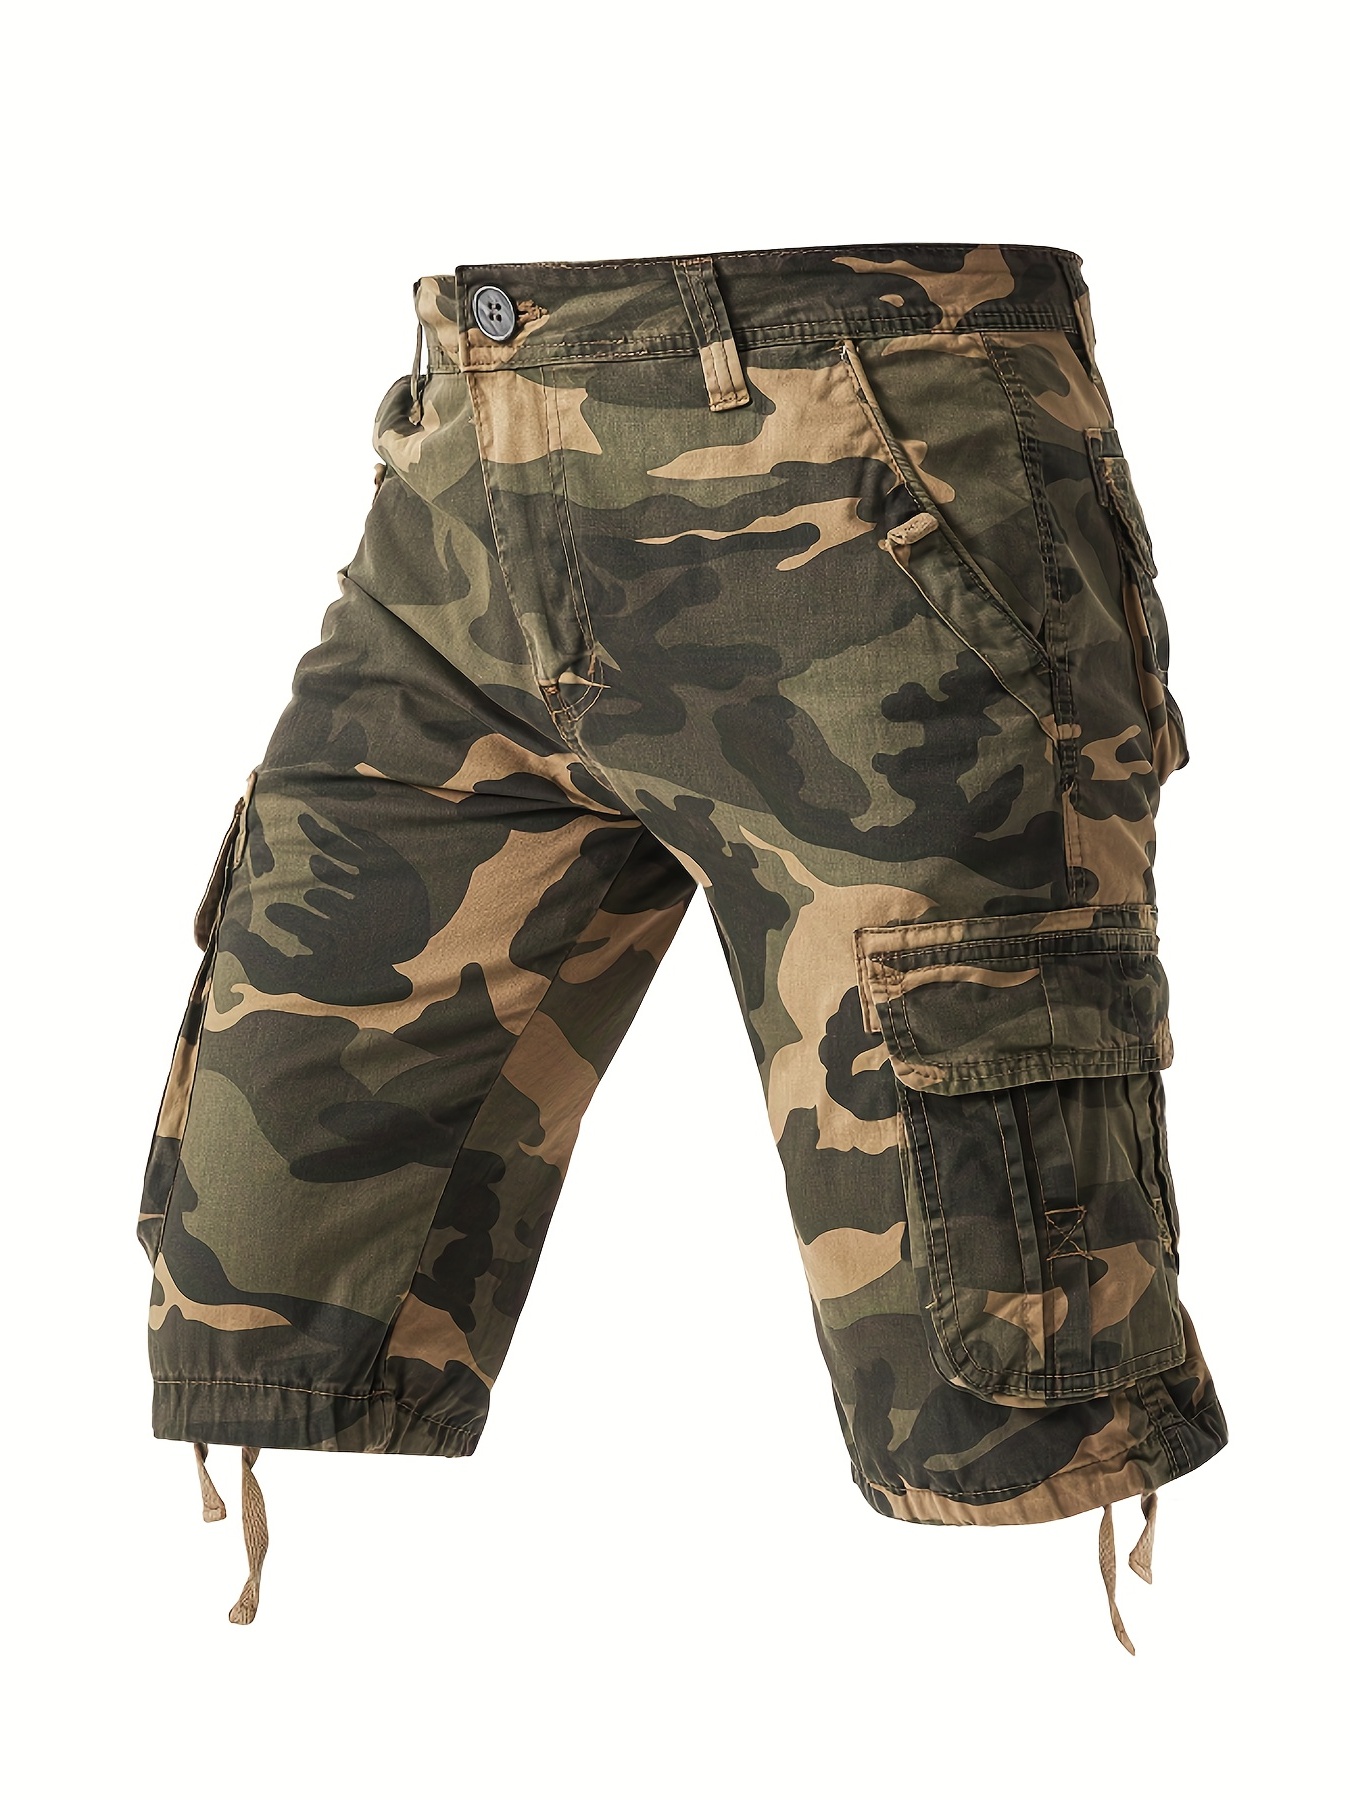 Guzom Men's and Big Men's Cargo Shorts- Trendy Casual with Pocket Solid  Sport Pants for Less Khaki Size 6XL 